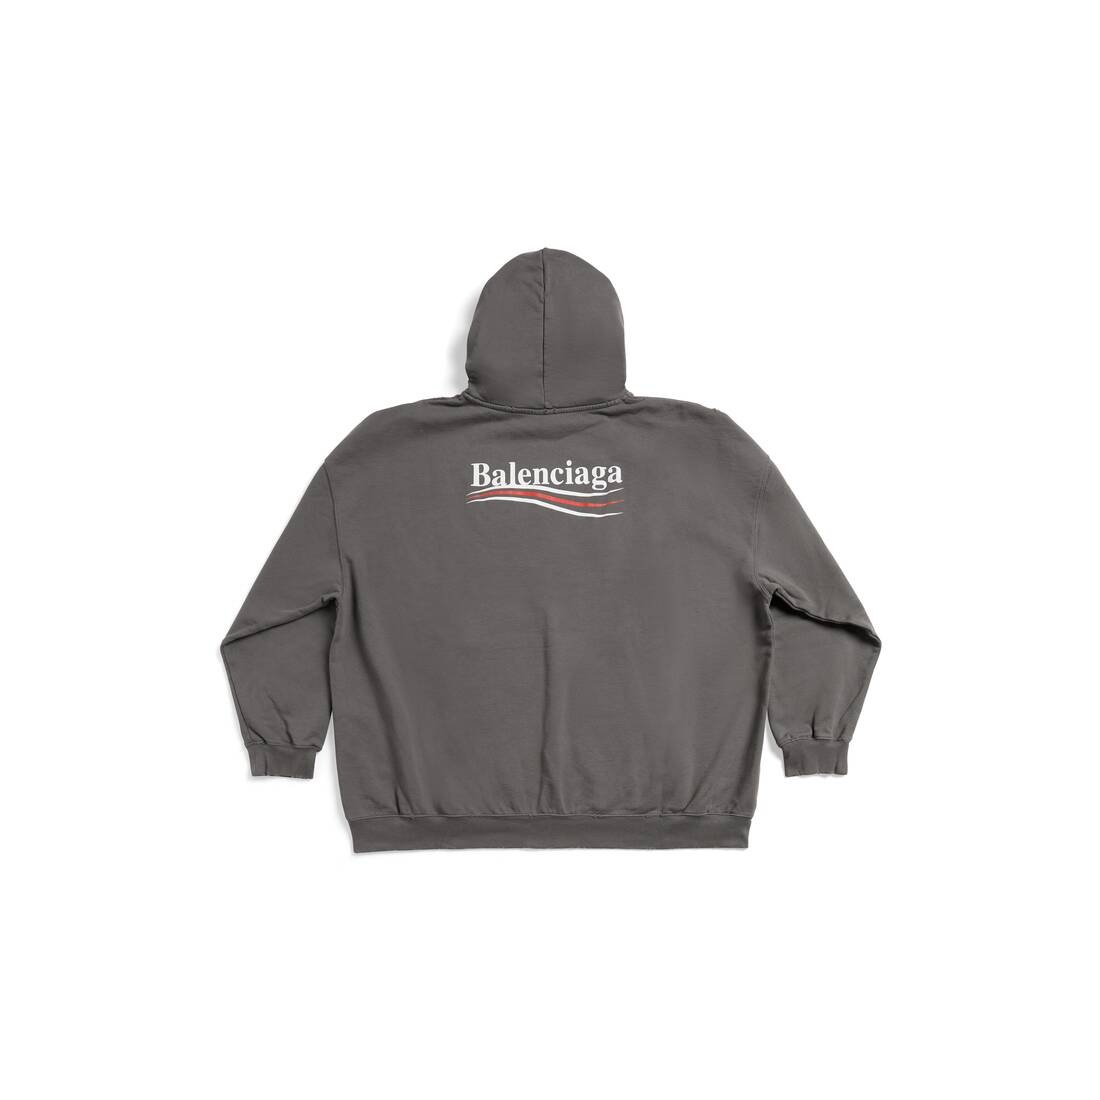 Women's Political Campaign Hoodie Large Fit in Grey - 2